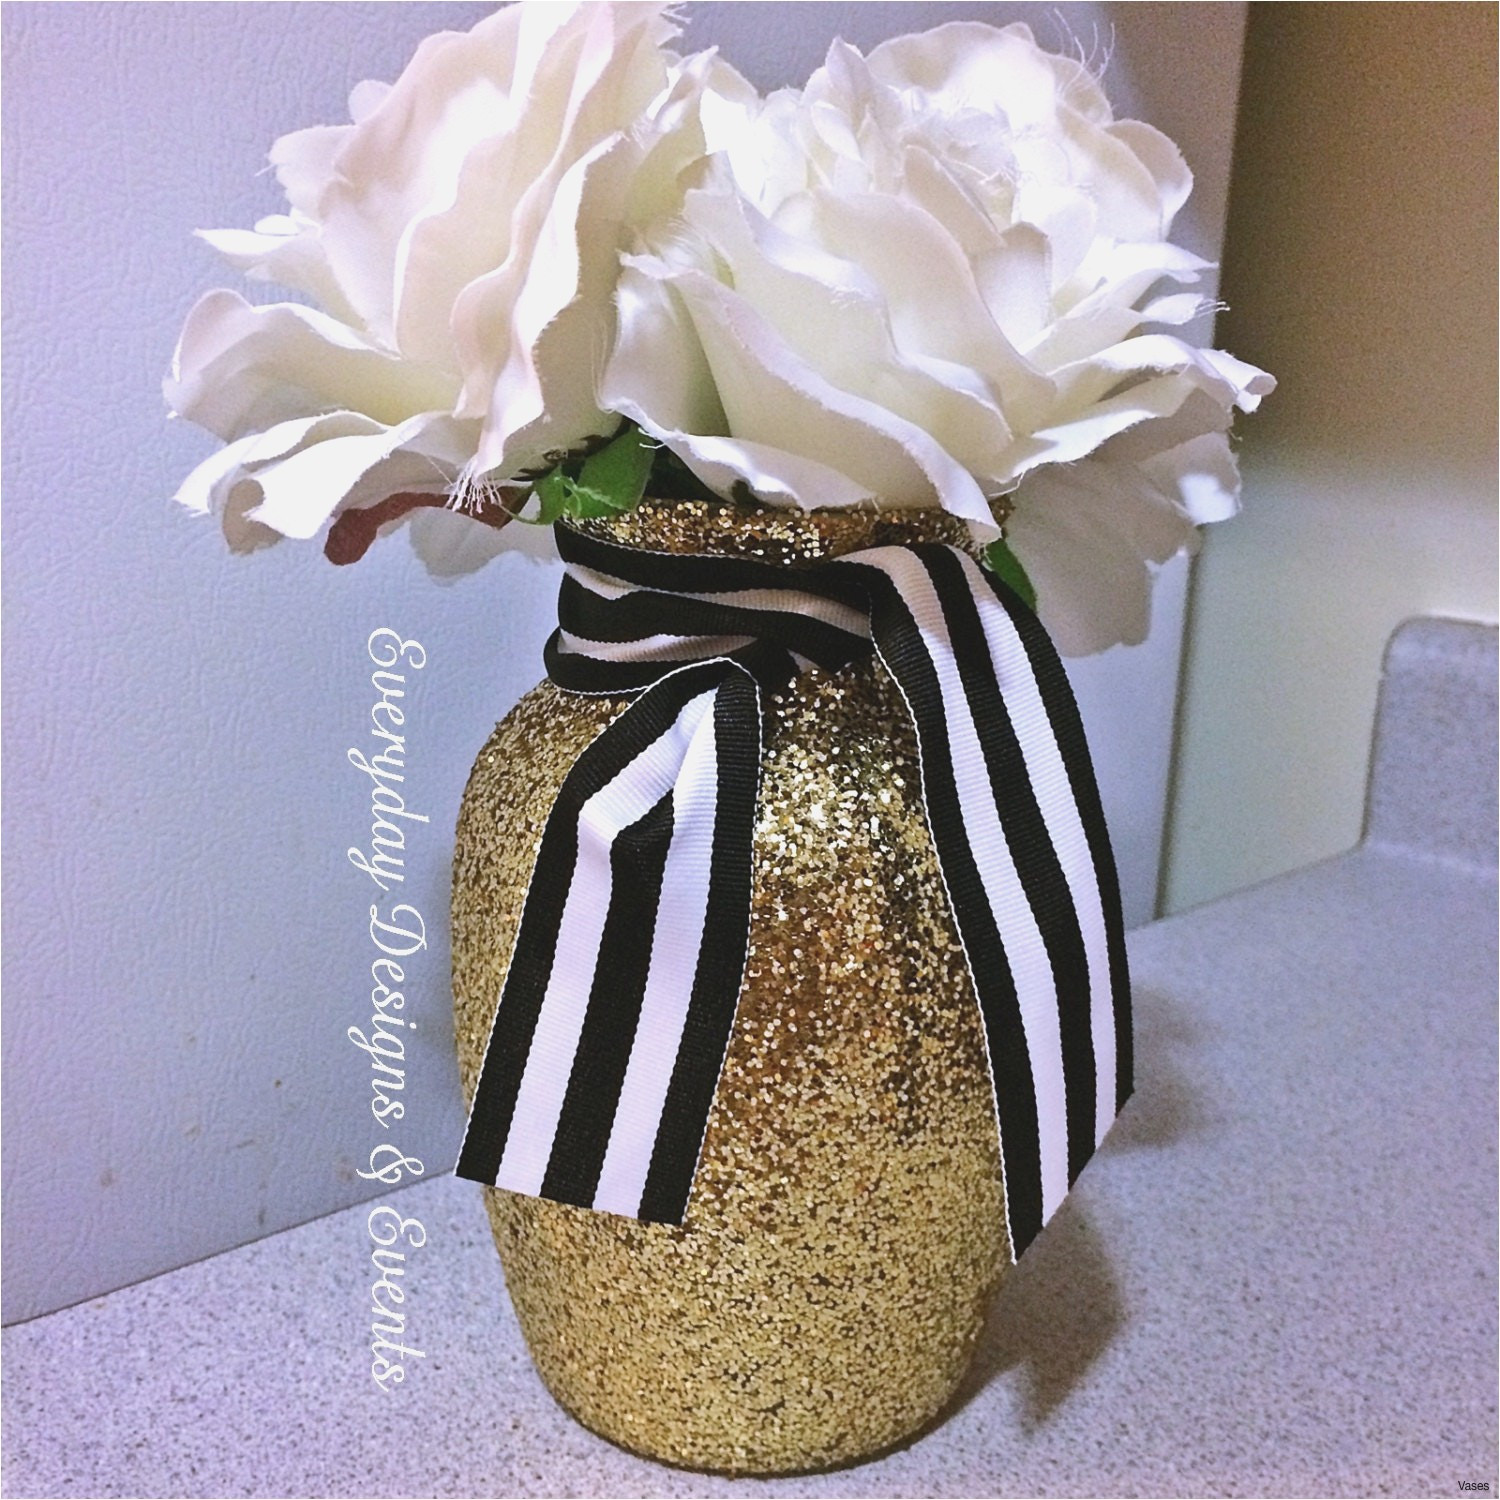 16 Stylish Black Vases for Wedding Centerpieces 2024 free download black vases for wedding centerpieces of black and white wedding favors fabulous vases baby shower flower for black and white wedding favors fabulous vases baby shower flower tutu vase center